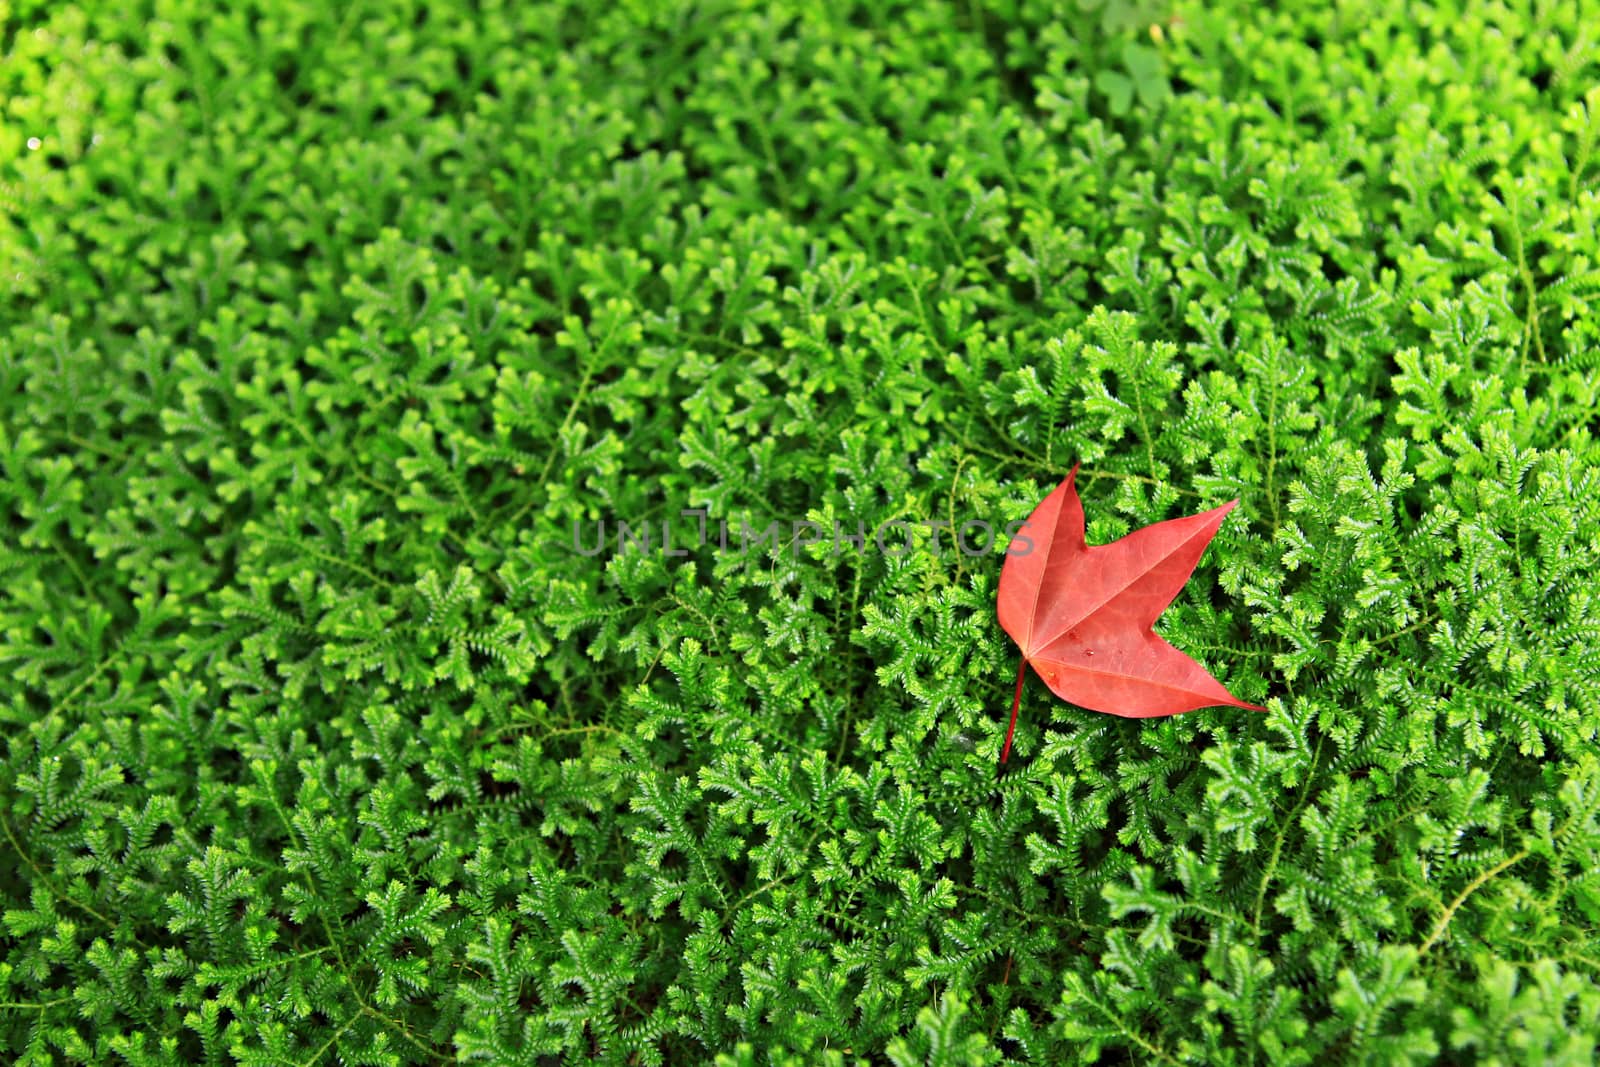 Red maple leaf fallen on the green grass